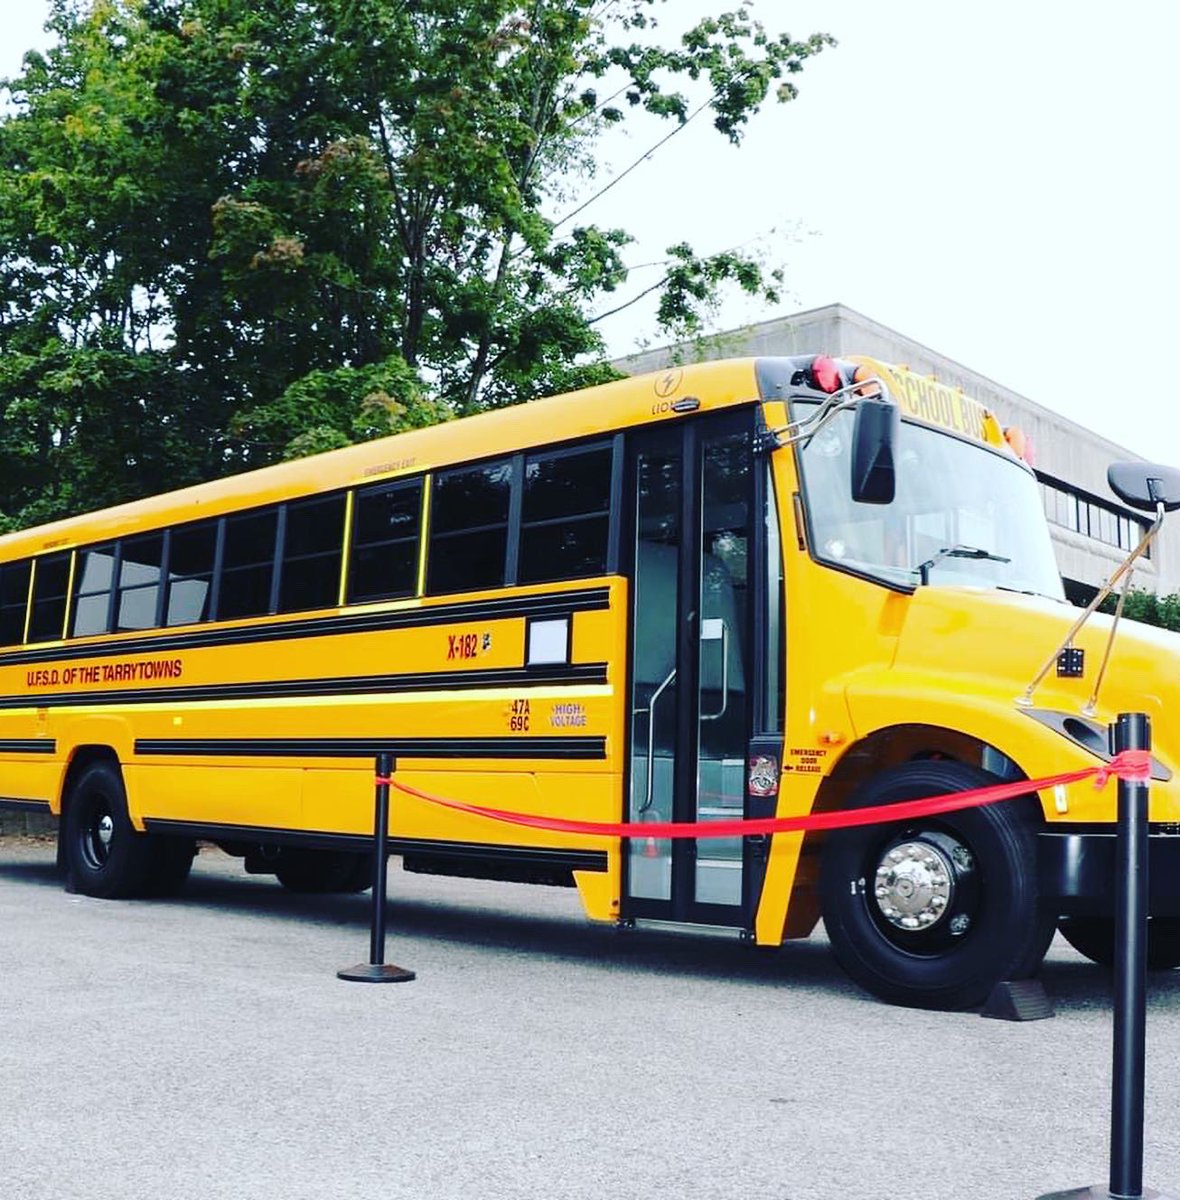 Woo hoo!! Tarrytown’s first #electricschoolbus is here! ⚡️🚌❤️We’re so grateful for everyone’s hard work to make this happen for a healthier and greener ride for our kids!❤️🌎 THANK YOU to @ufsdtarrytowns @TomAbinanti and all the @MothersOutFront @mothersoutfrontny volunteers.